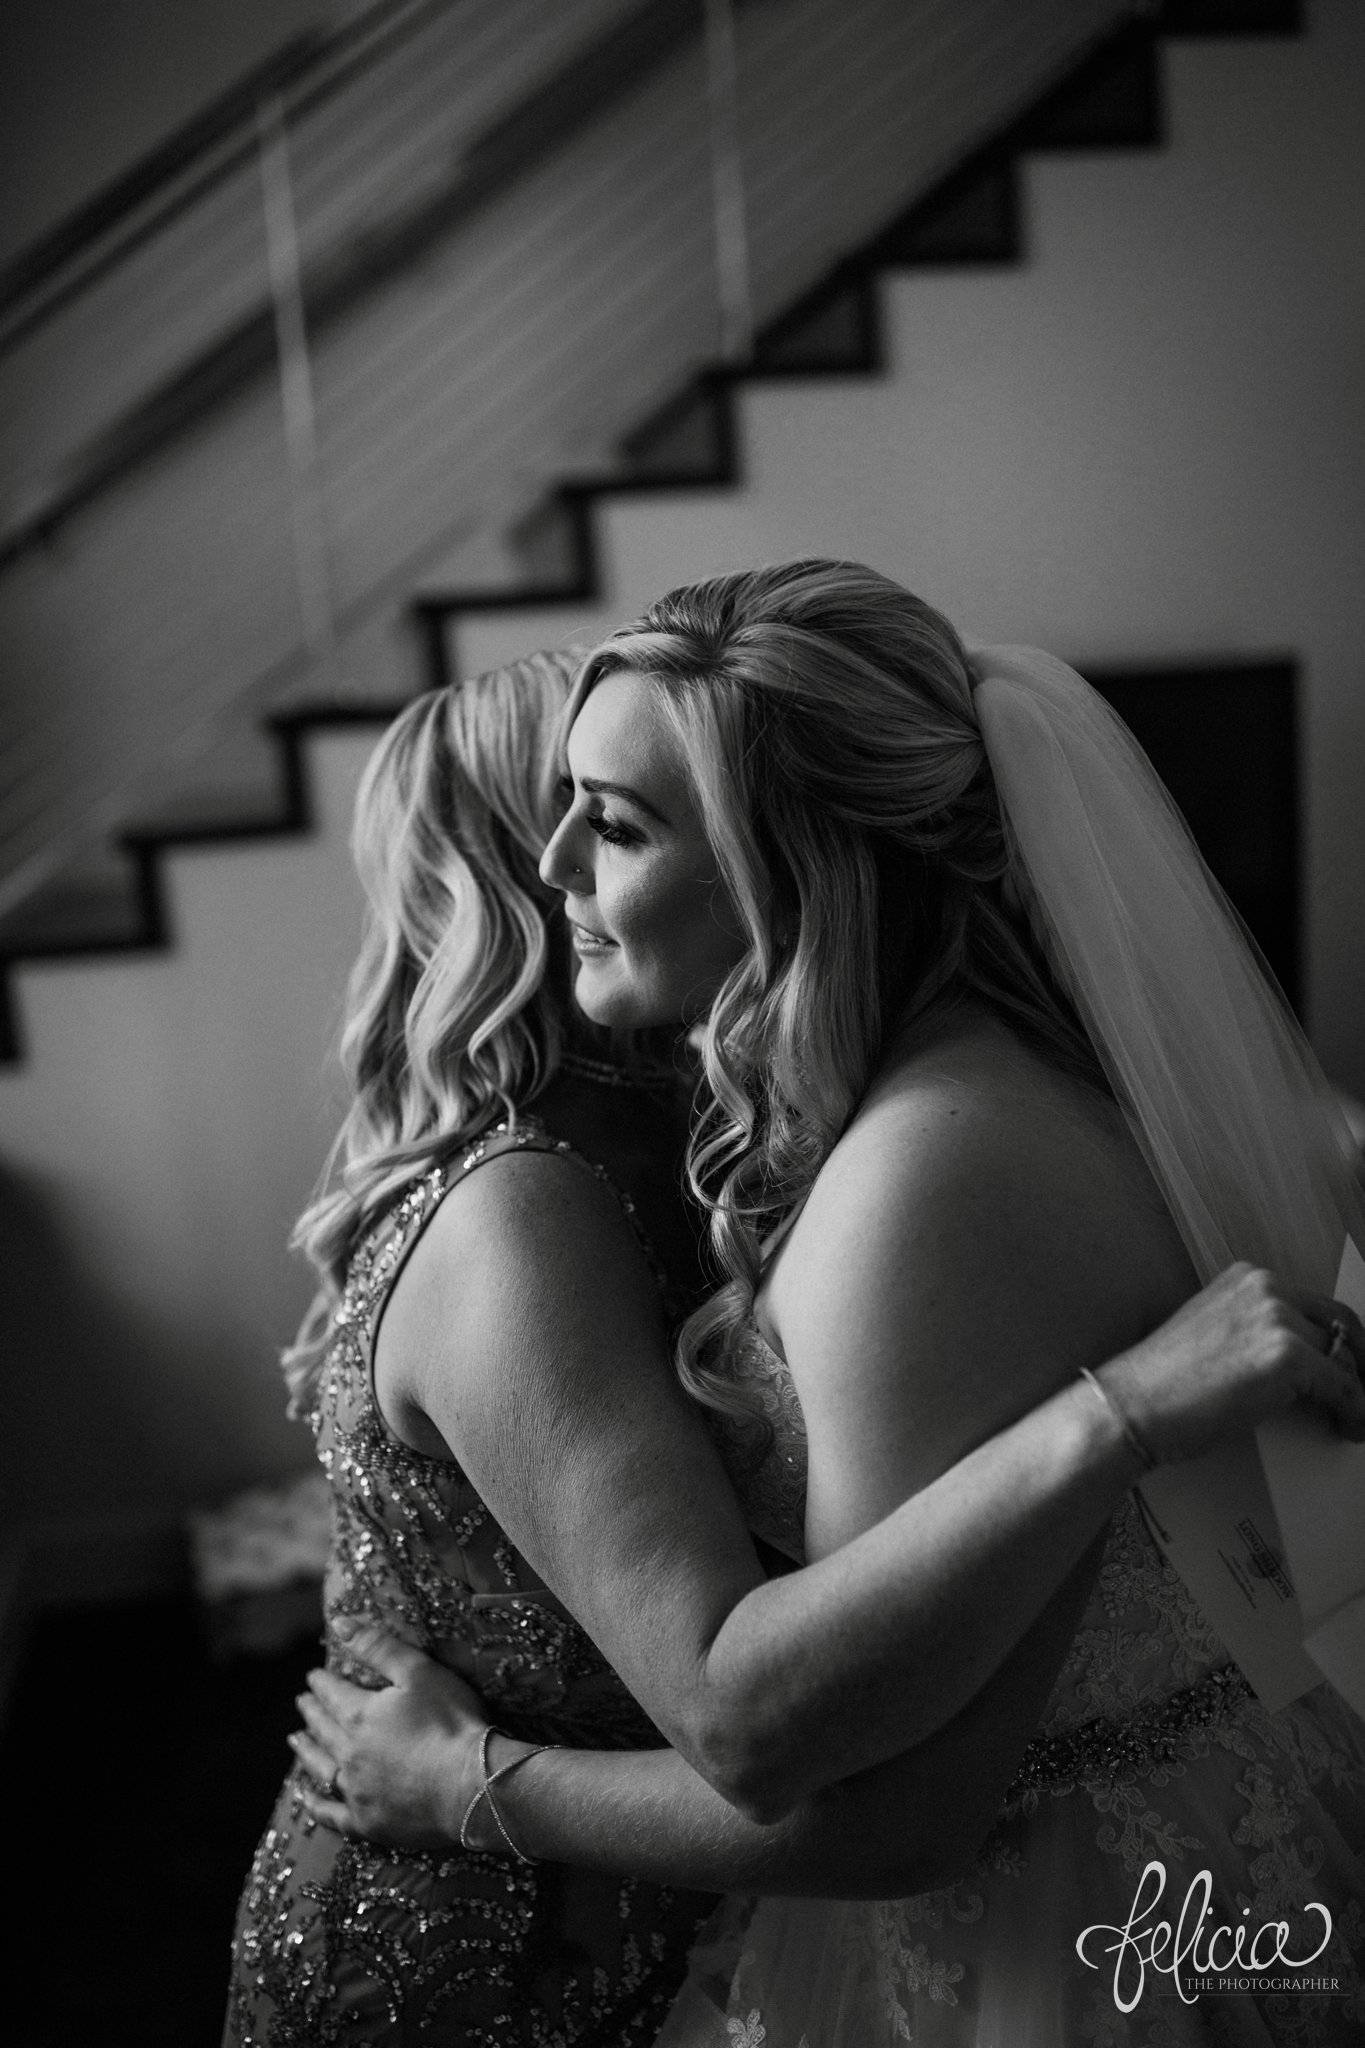 images by feliciathephotographer.com | wedding photographer | downtown kansas city | getting ready | mother daughter | details | black and white | bella bridesmaids | sequins | sentimental | natural light | 